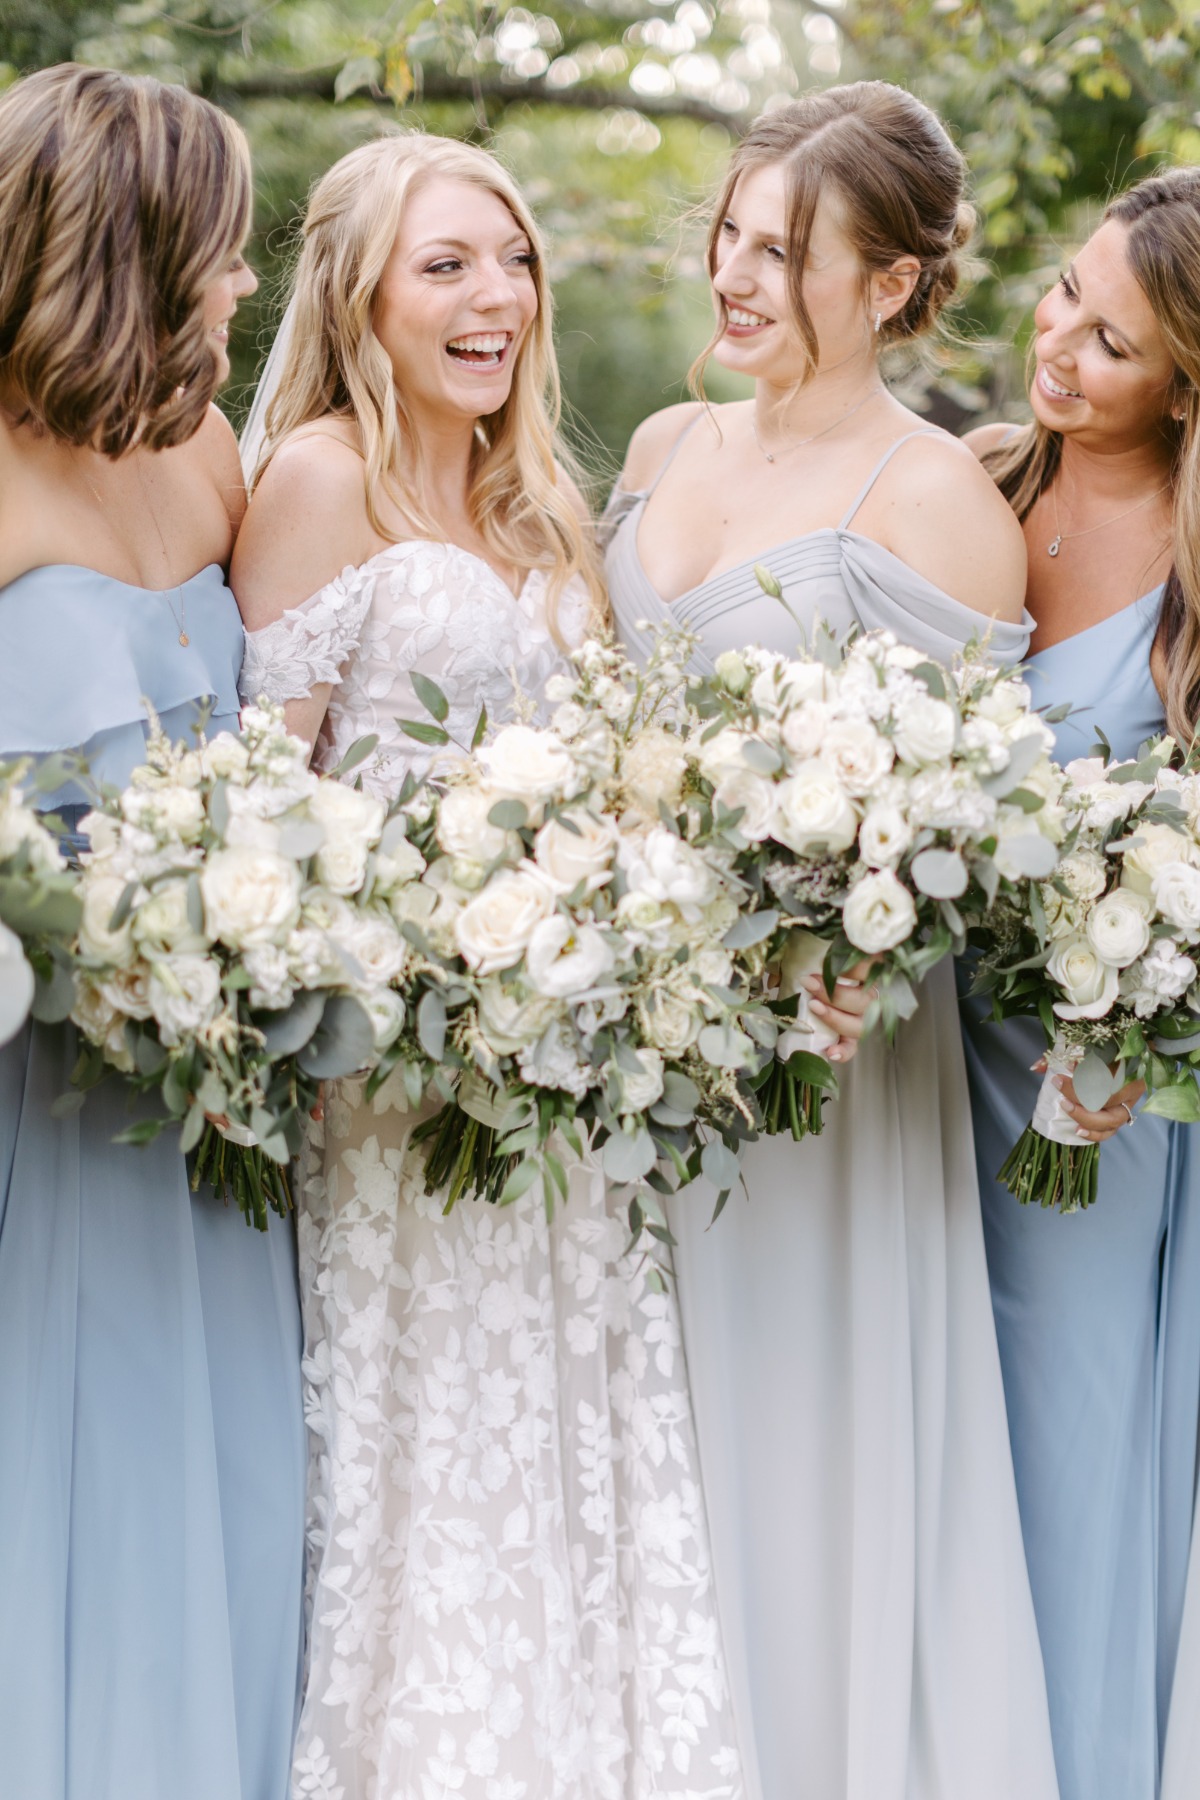 Bride and bridesmaids holding bouquets of white flowers